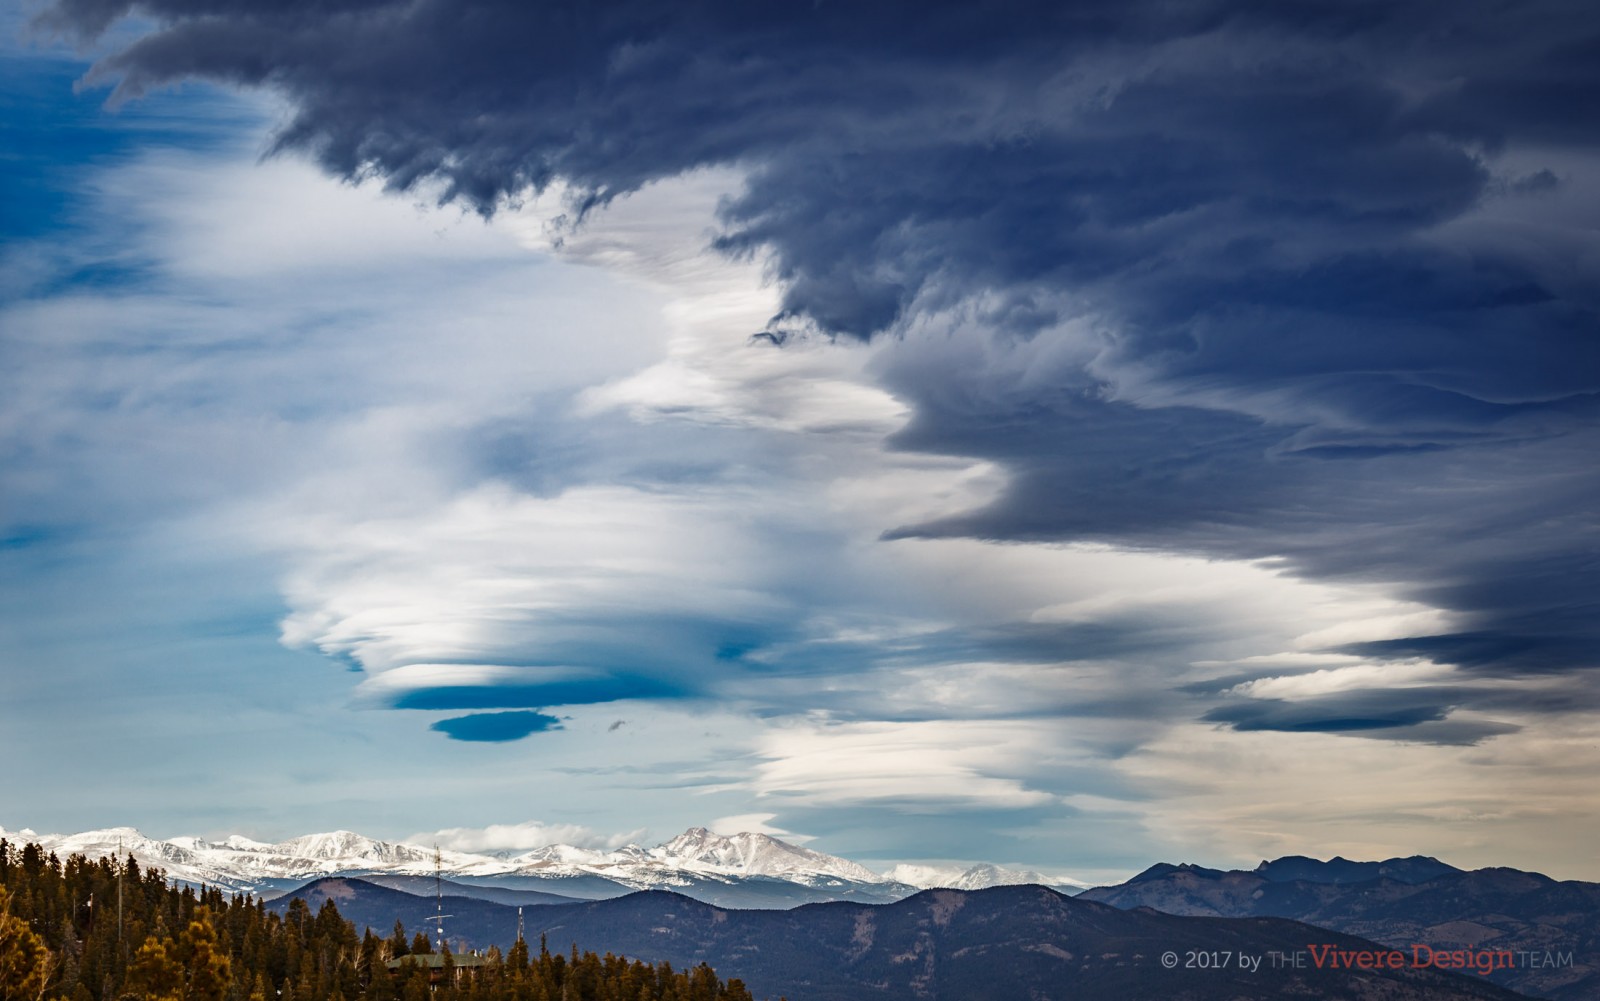 The Vivere Design Team Office Window View -- Lenticular Clouds